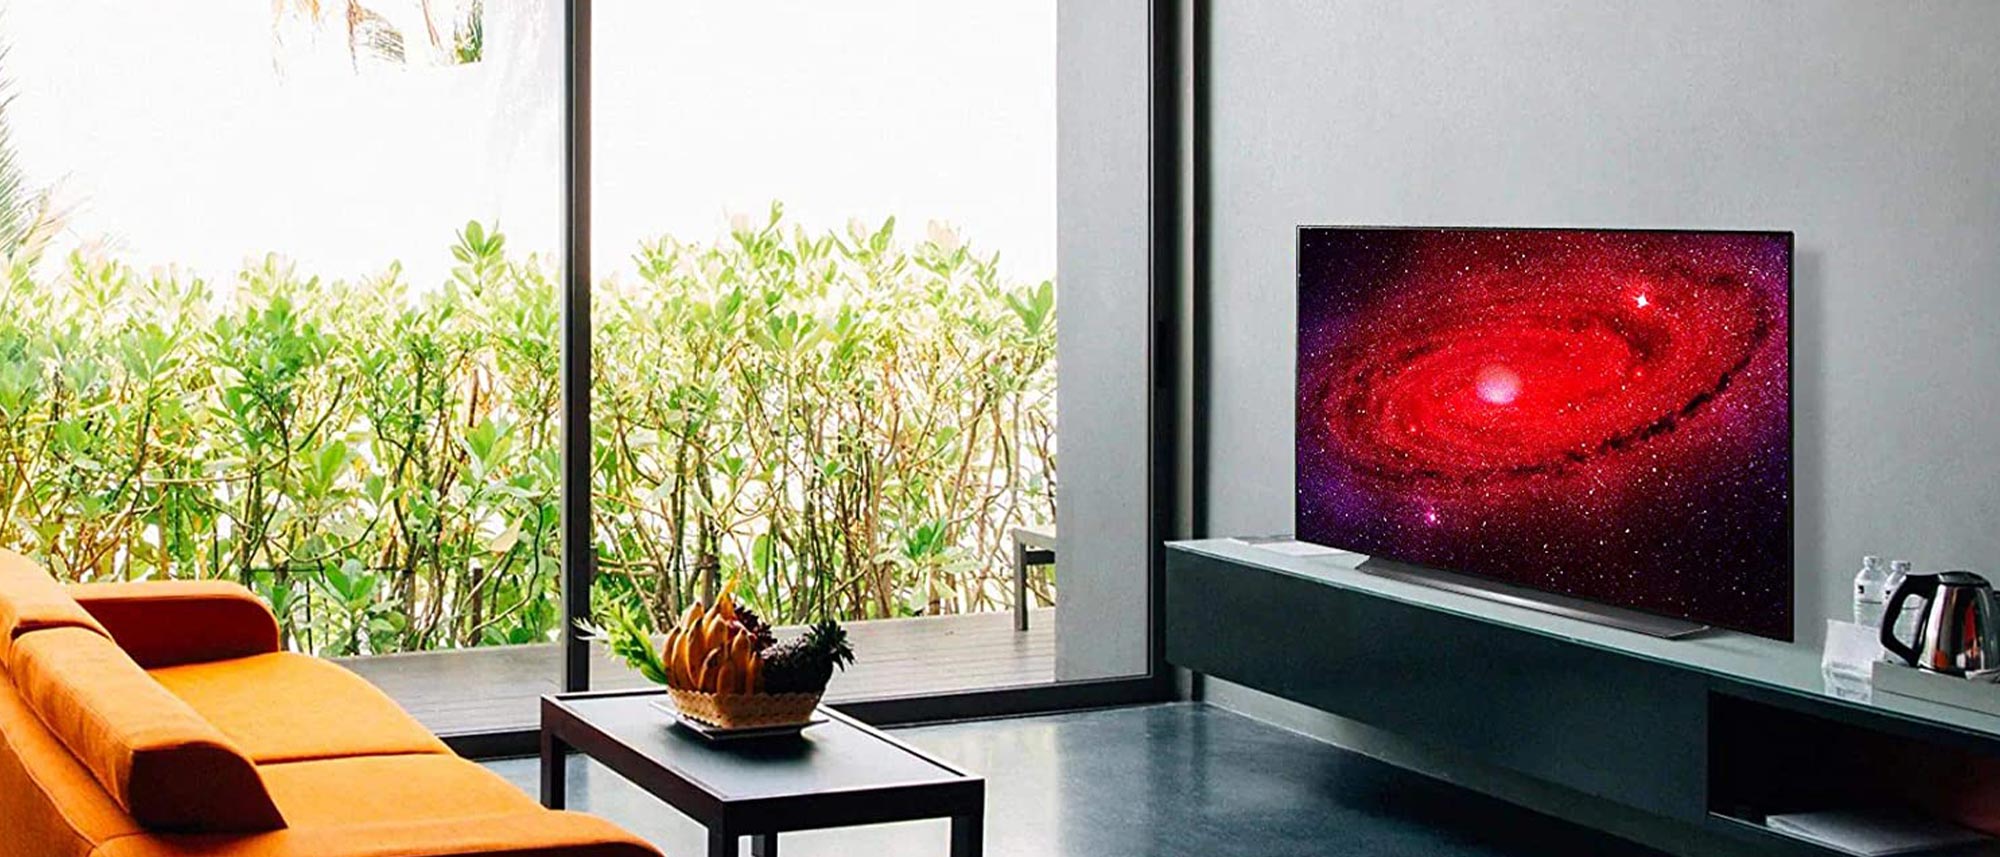 LG's CX OLED TV Review: Pretty and Expensive